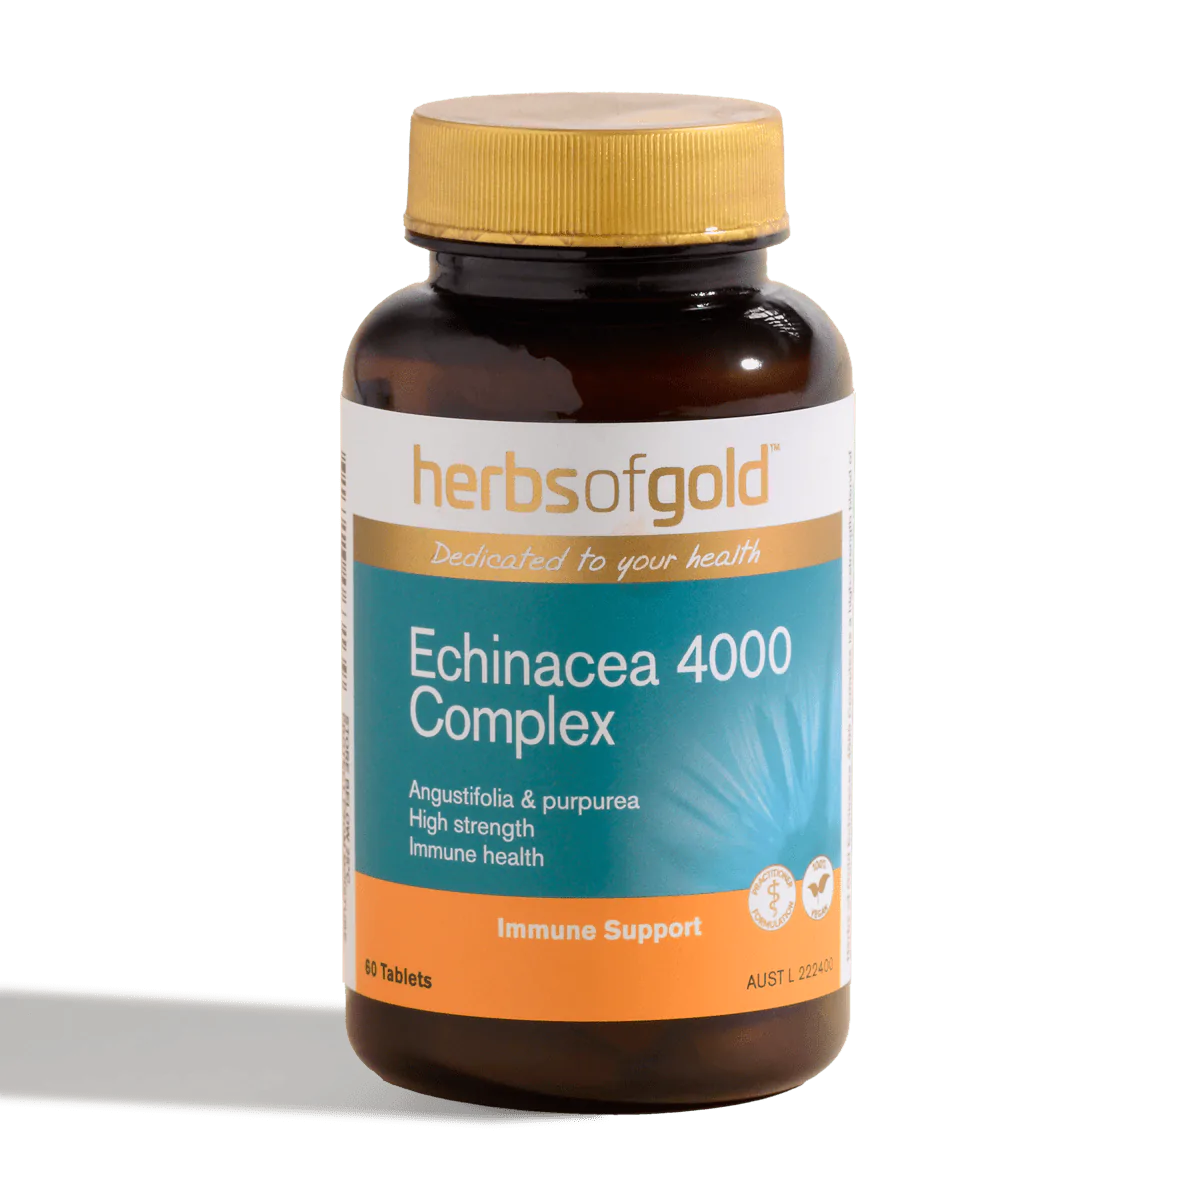 Herbs of Gold Echinacea 4000 complex